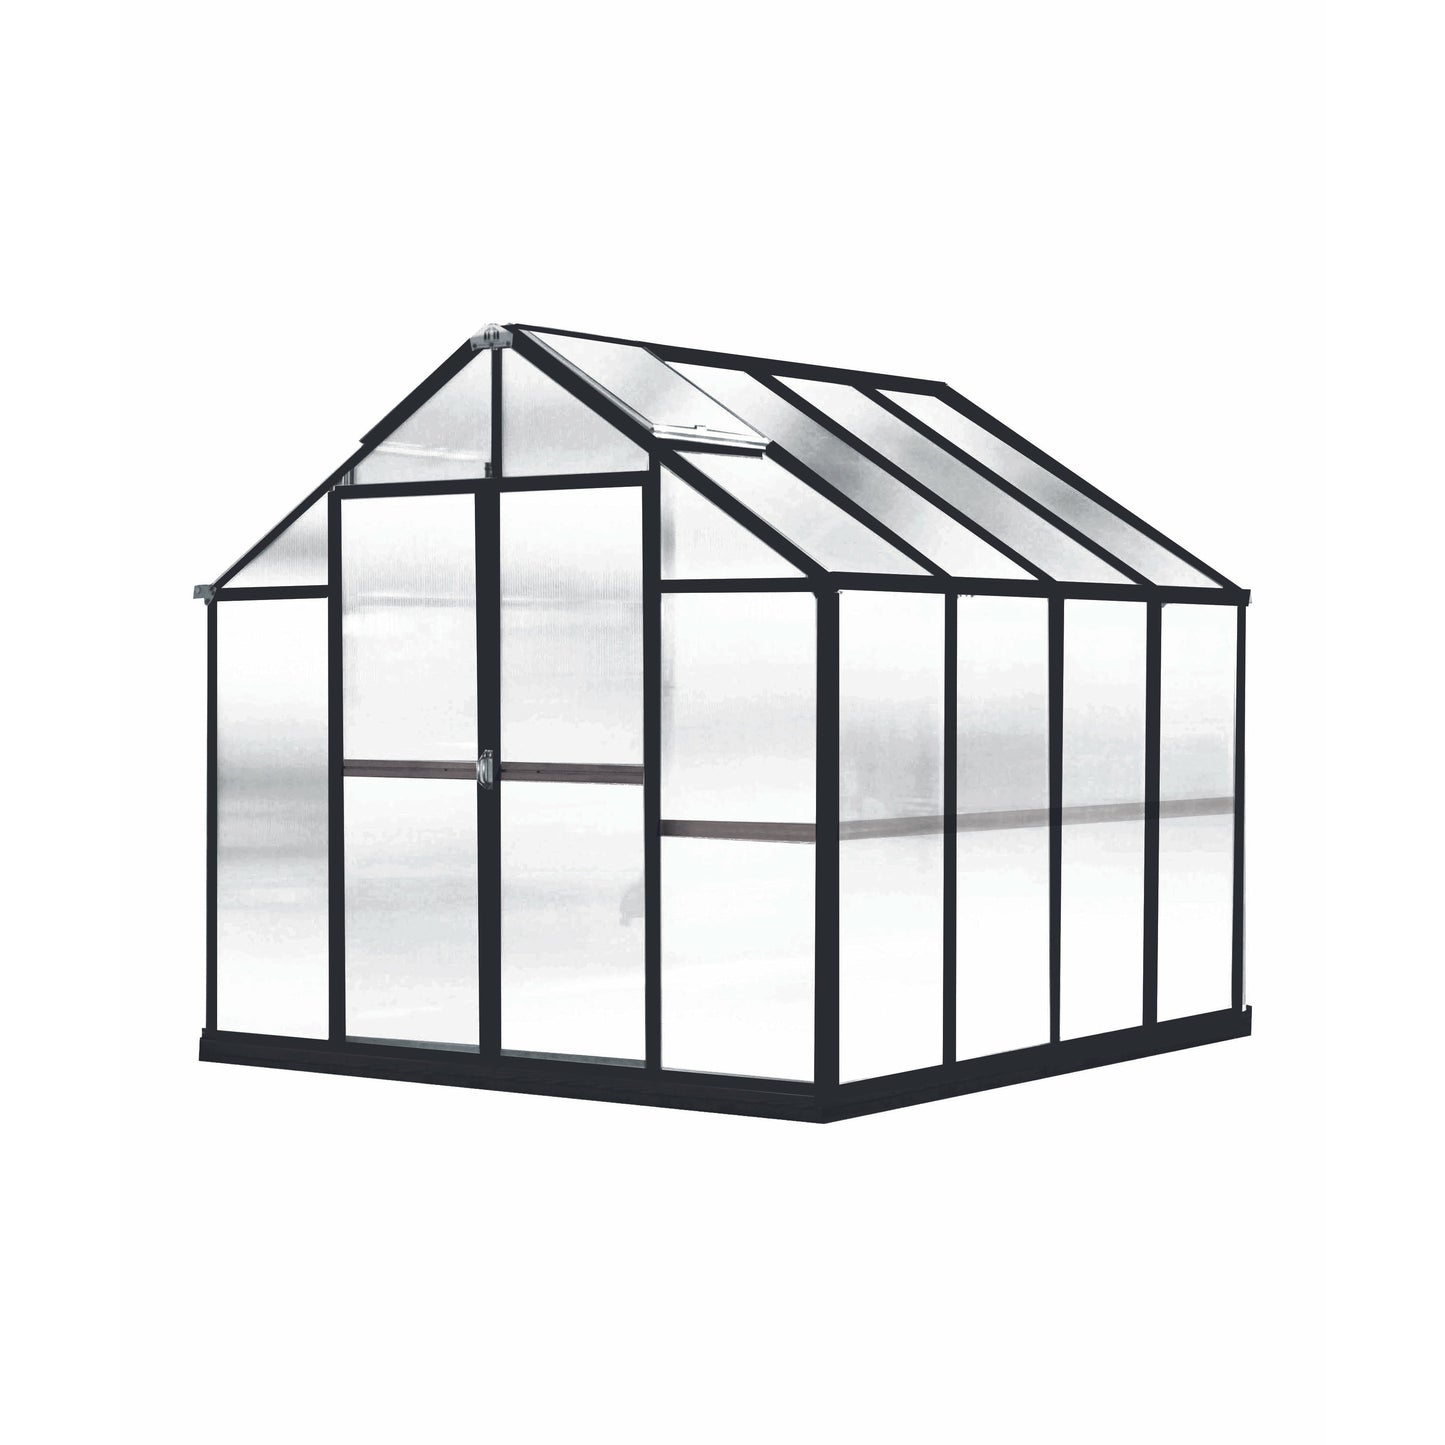 Mont Growers Edition Greenhouse 8FTx 8FT - Black Finish MONT-8-BK-GROWERS